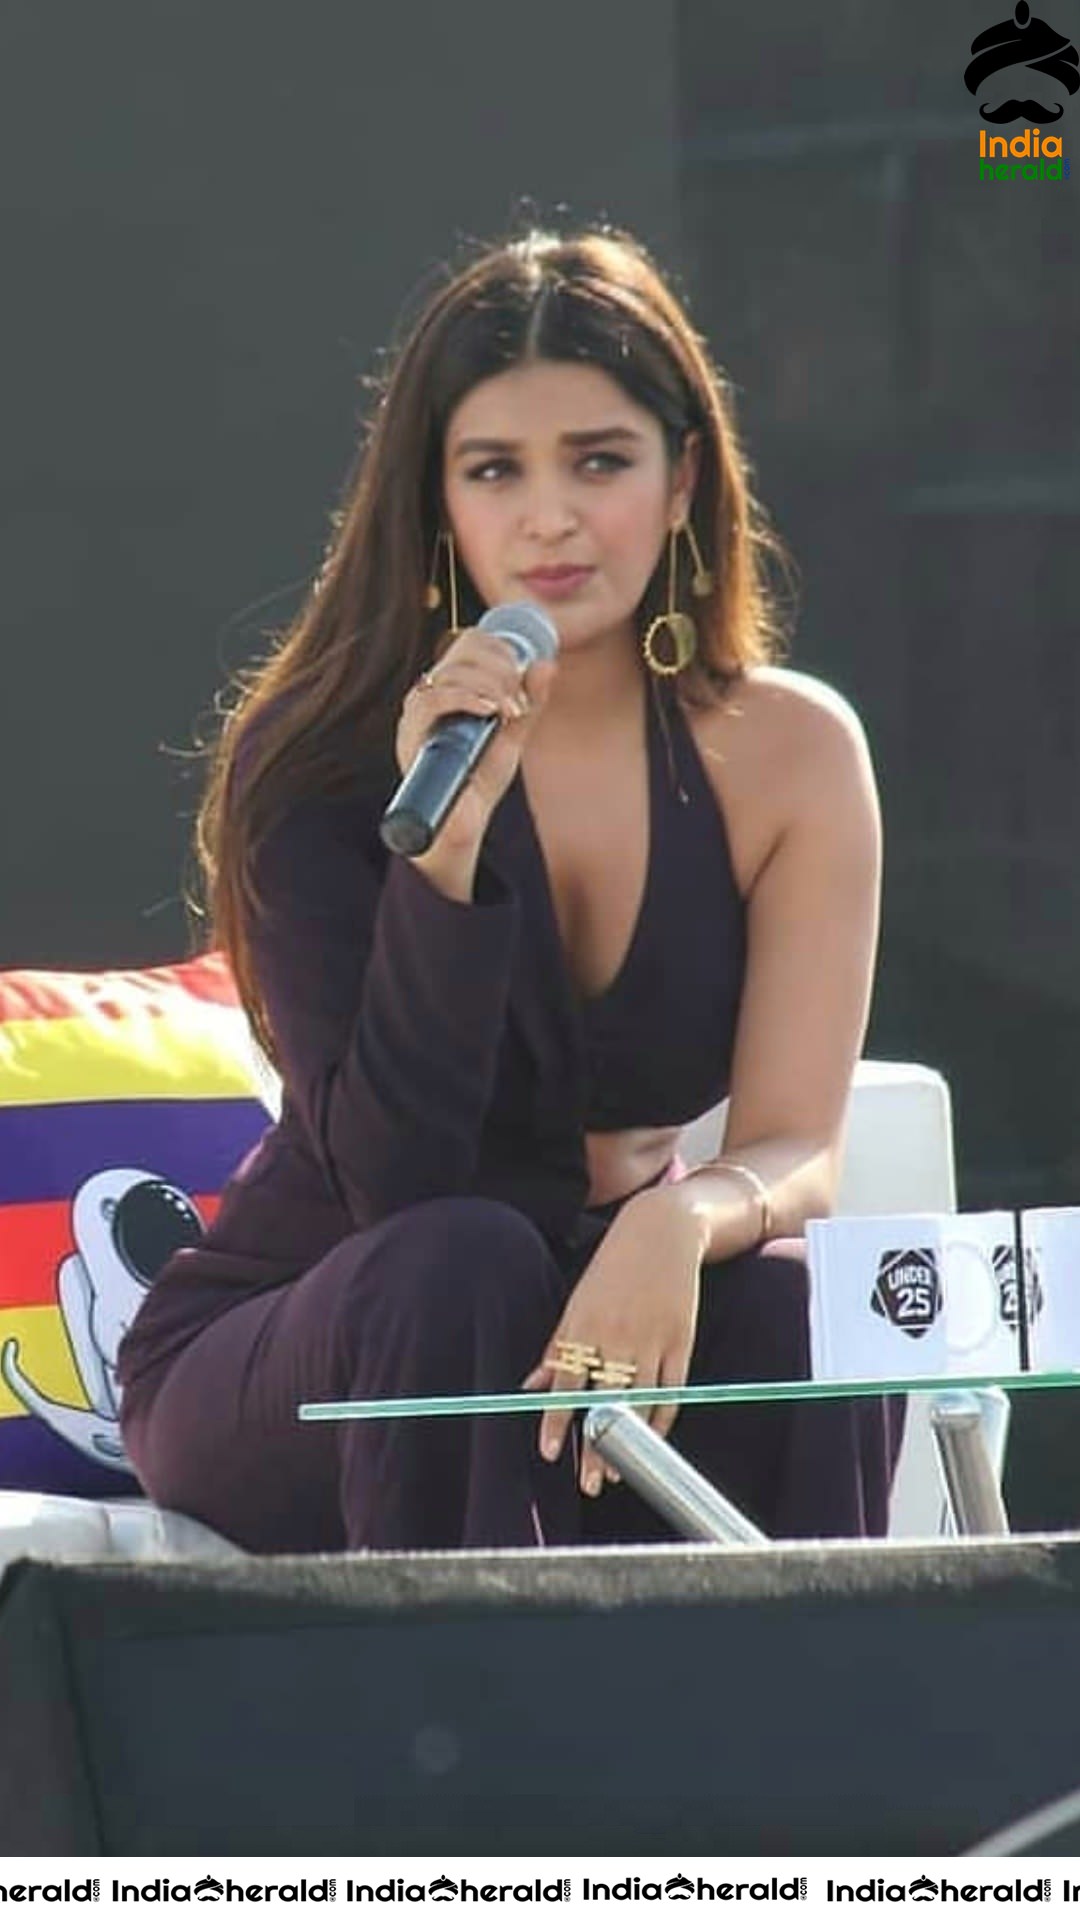 Nidhhi Agerwal shows her Hot Cleavage and Fleshy Waist during Interactive Session Set 1